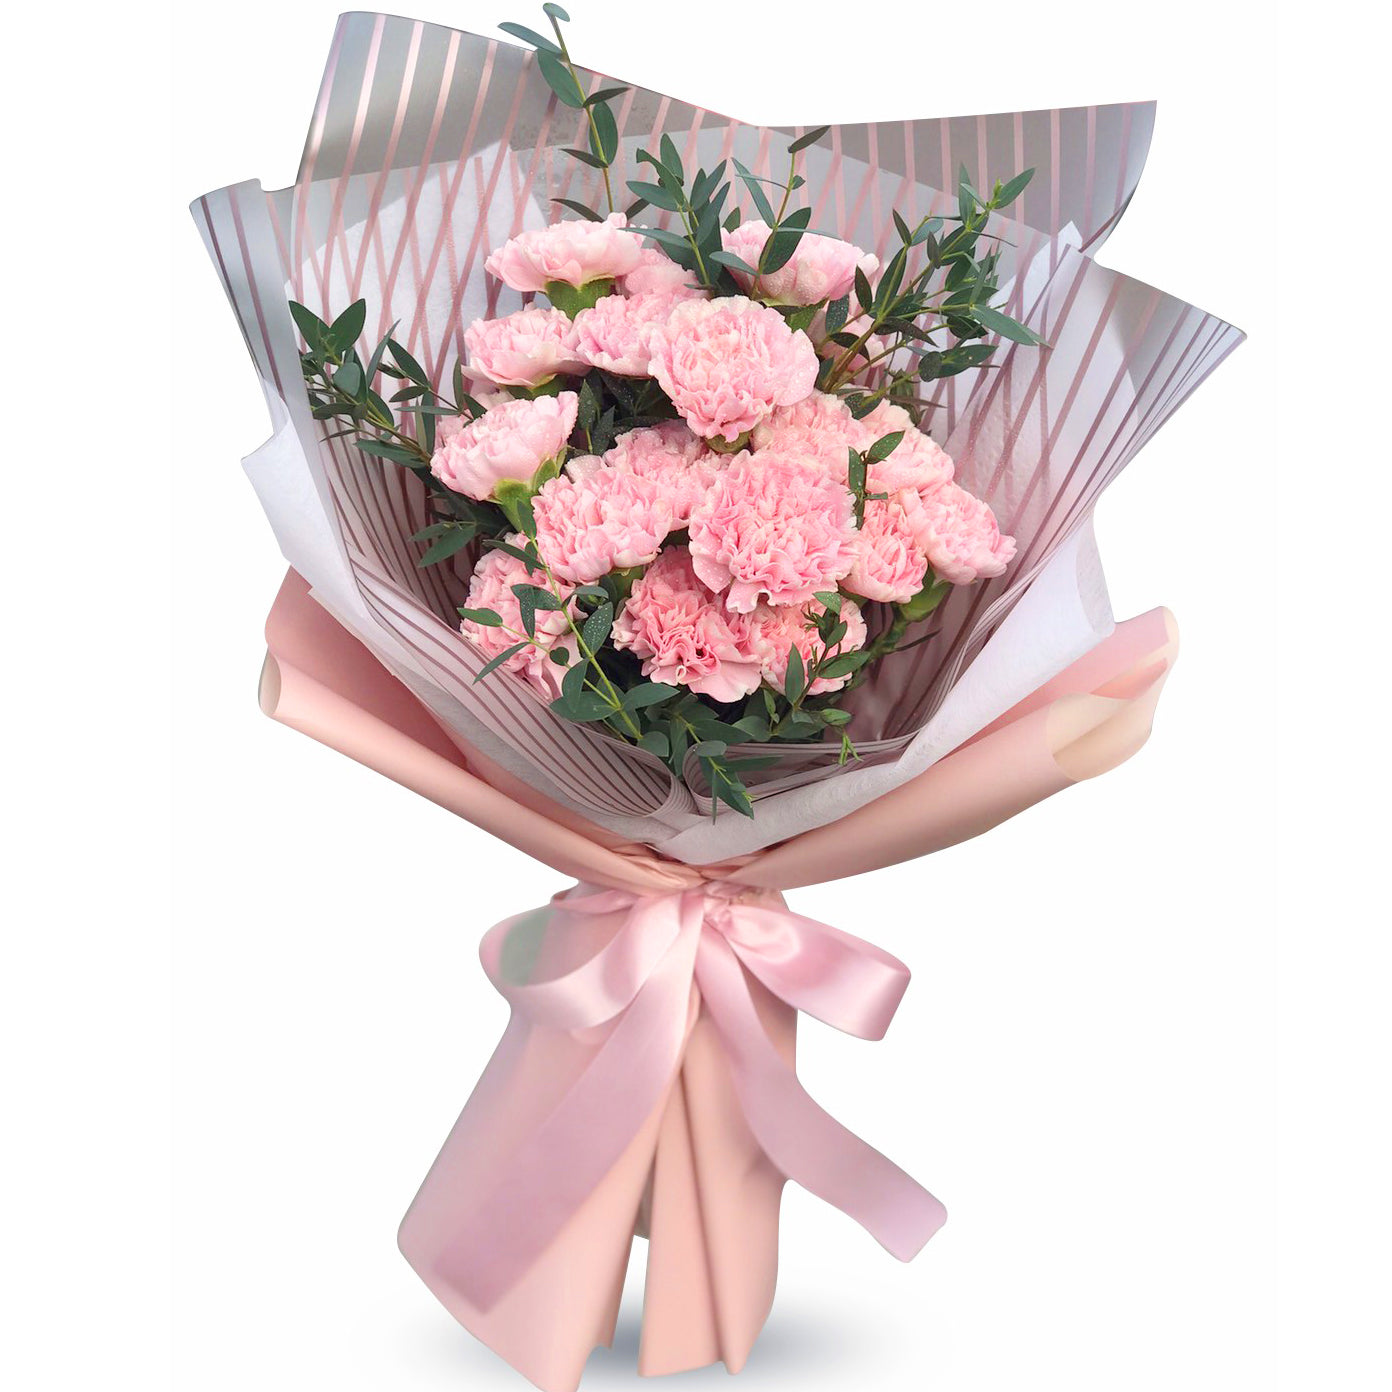 All Pink Fluffy Bouquet Of Carnations - April Flora